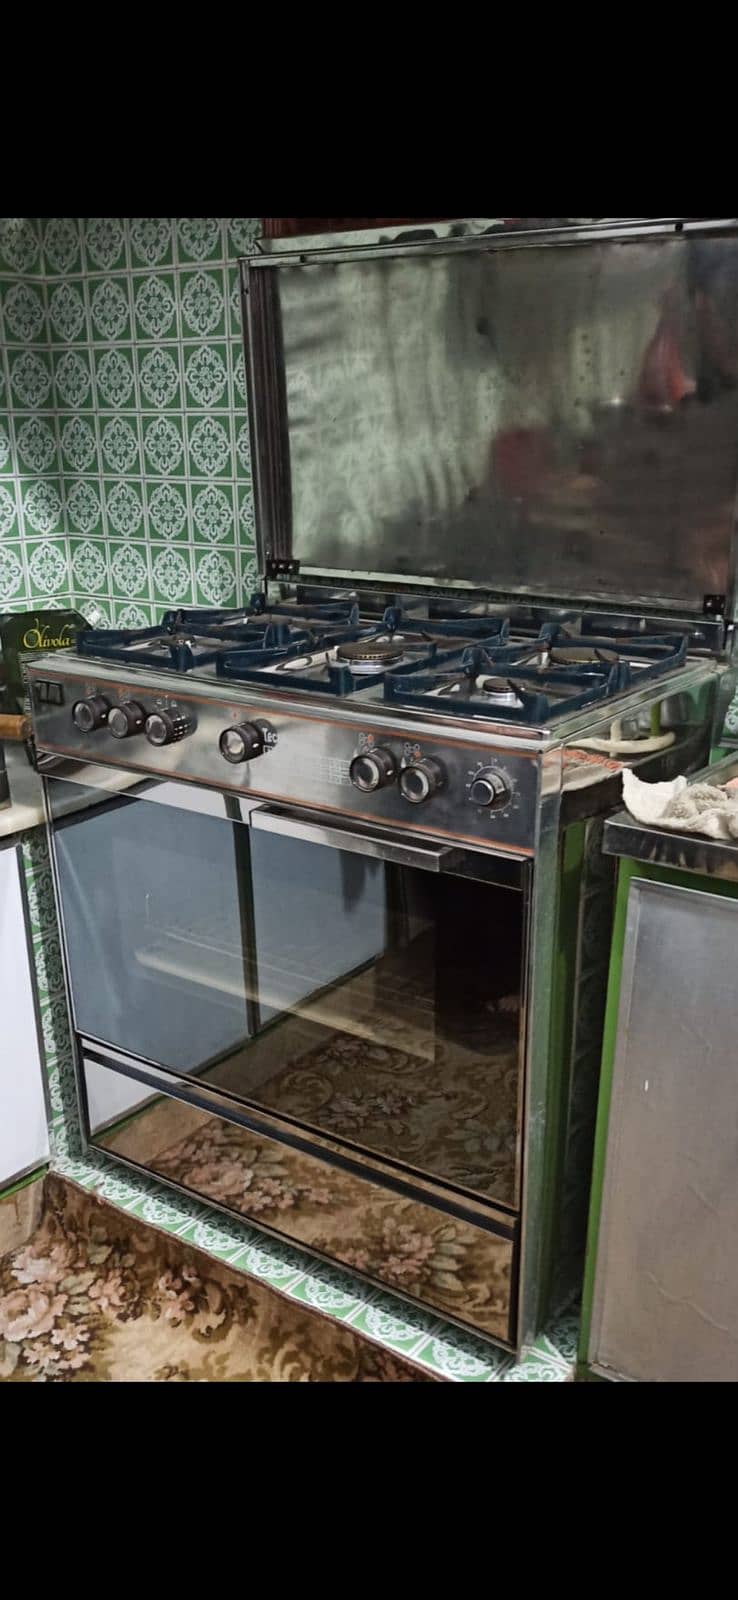 Pre-Loved Gas Oven: Bake Your Way to Deliciousness! 2